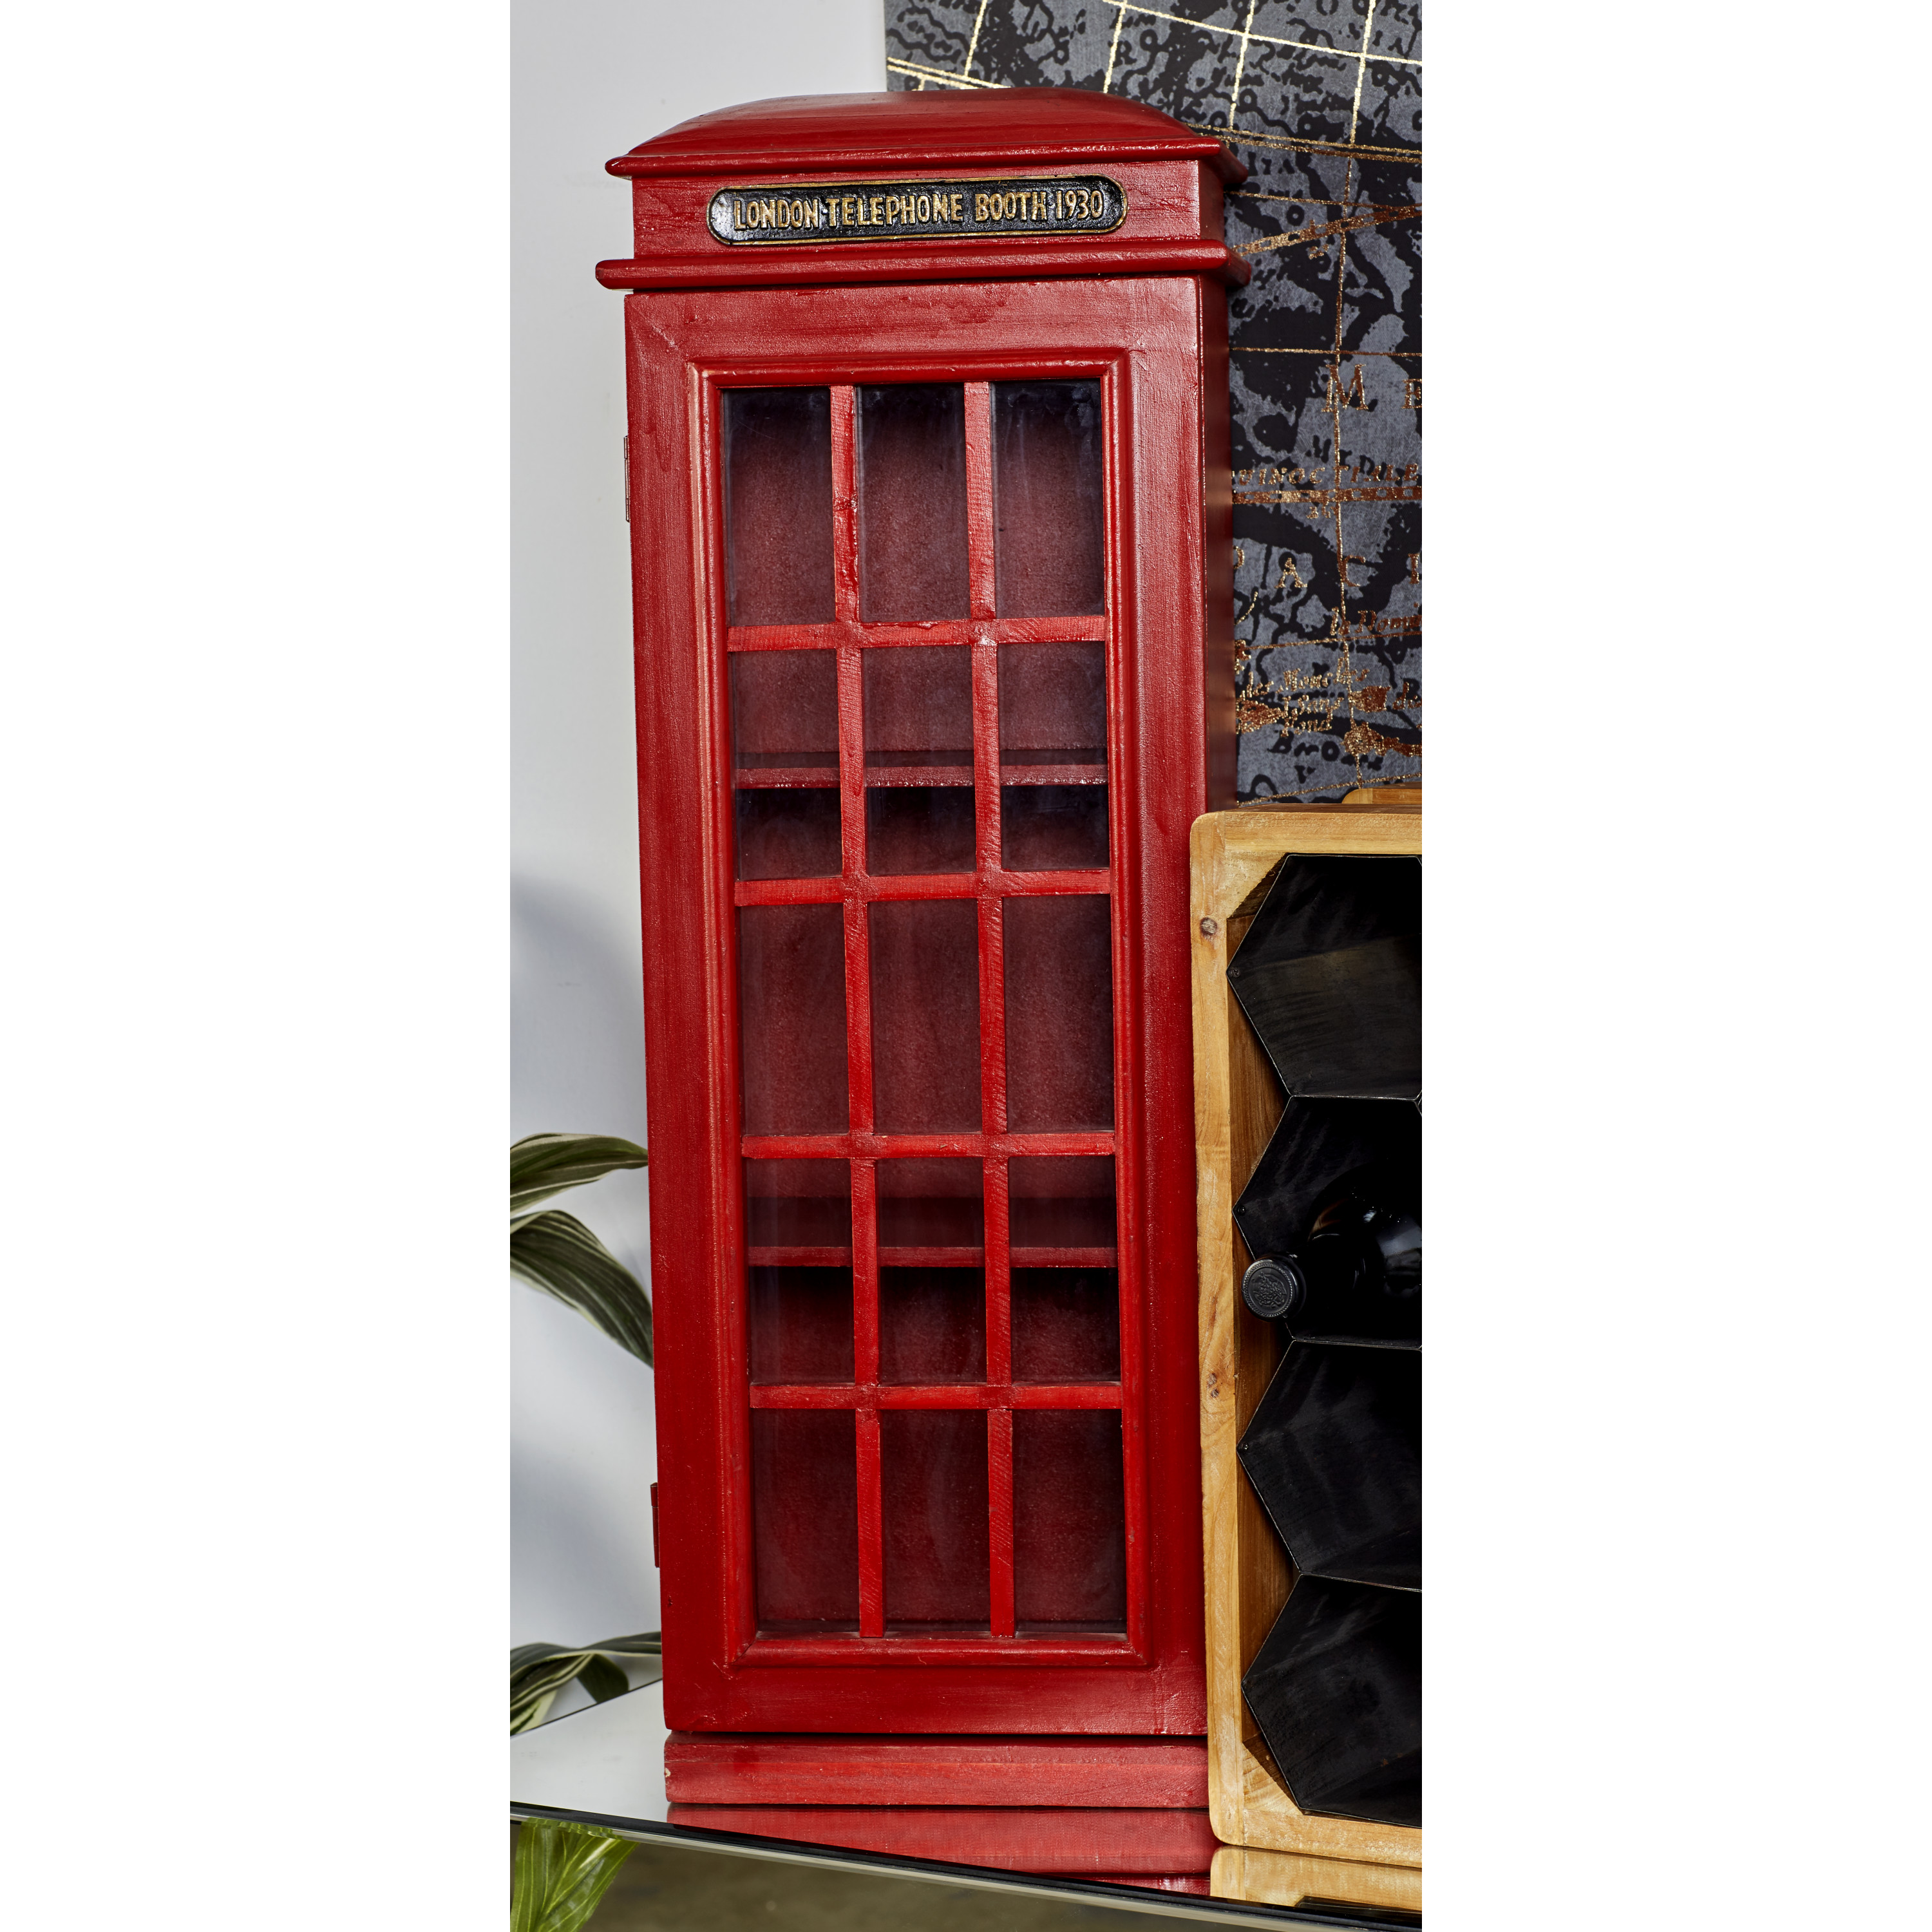 DecMode 11" x 30" Red Wooden London Telephone Booth 2 Shelf Storage Unit, 1-Piece - image 4 of 18